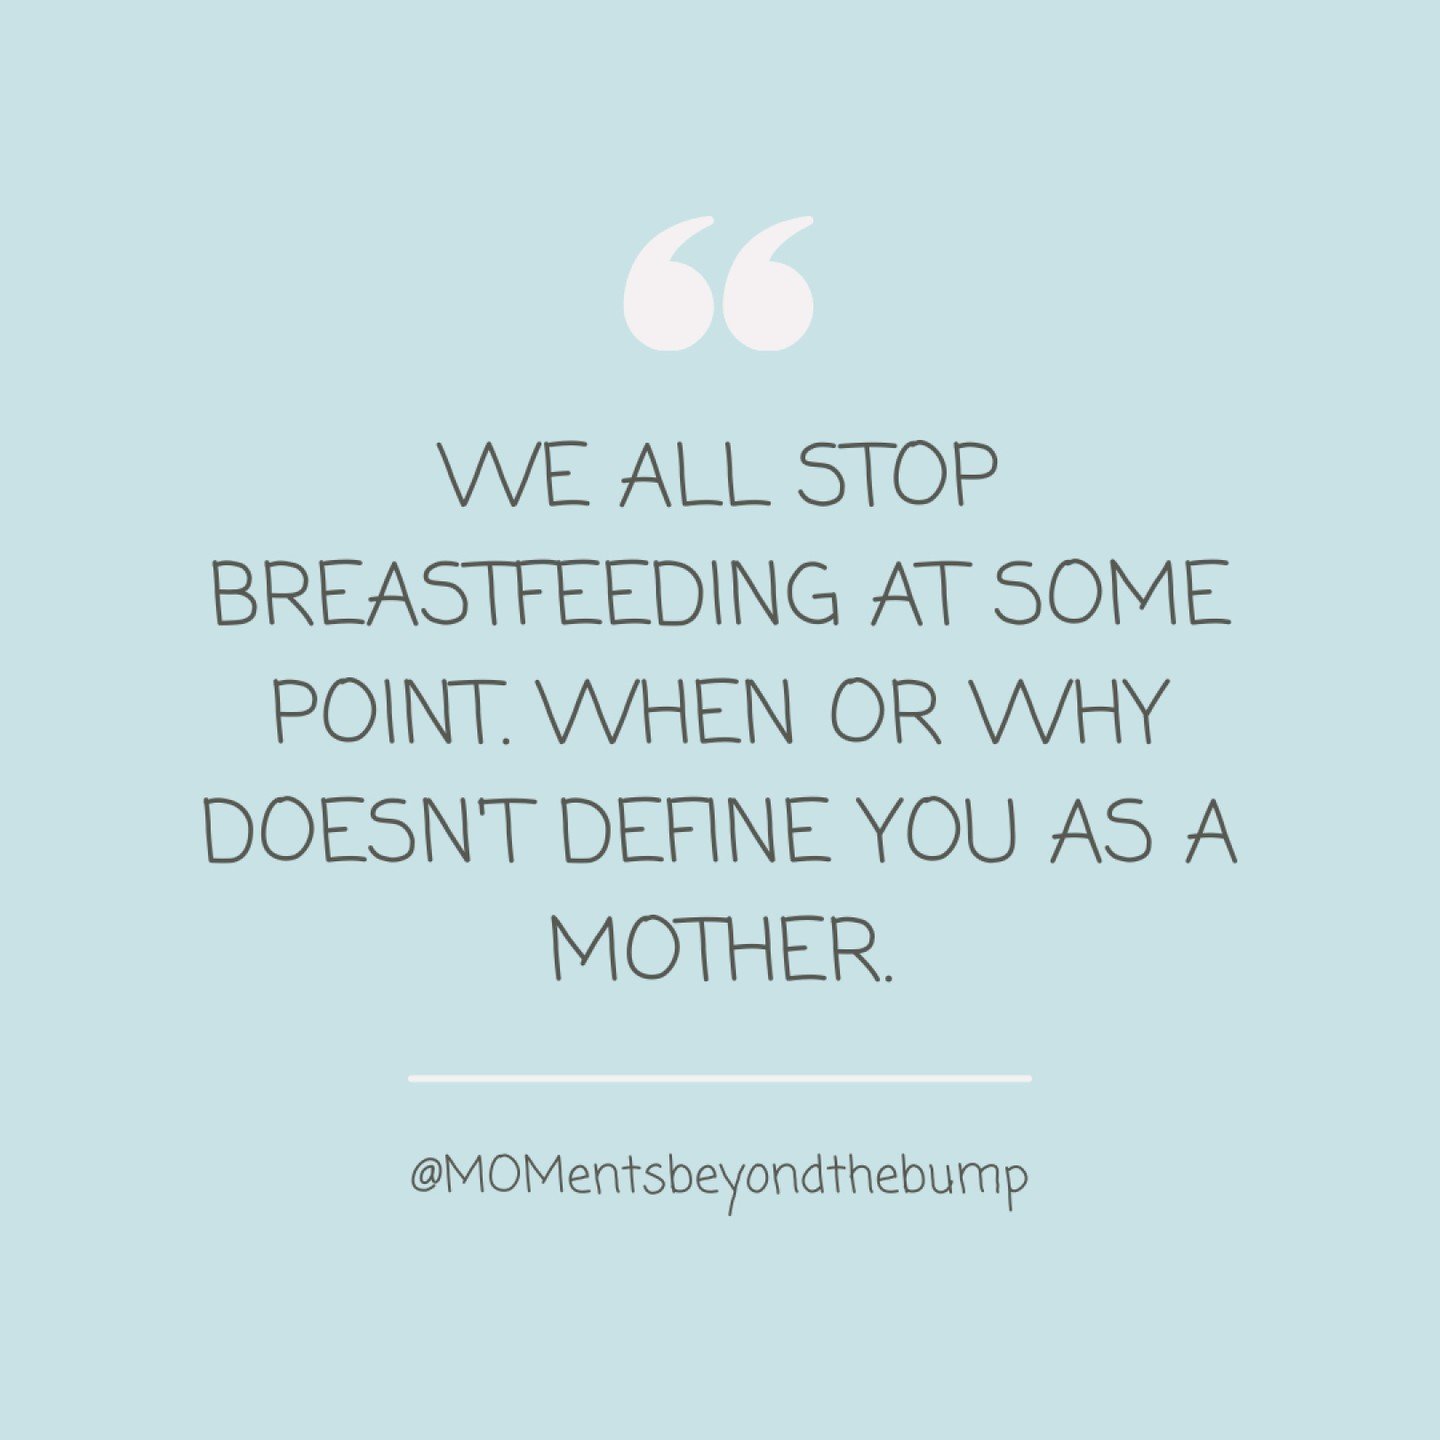 Piggy backing off of yesterday's post...

When or why you stop breastfeeding doesn't 👏🏼 define 👏🏼 you 👏🏼 as 👏🏼 a 👏🏼 mother!

👉🏻Maybe you're going back to work and don't want to have to deal with pumping...

👉🏻Maybe you've had mastitis s